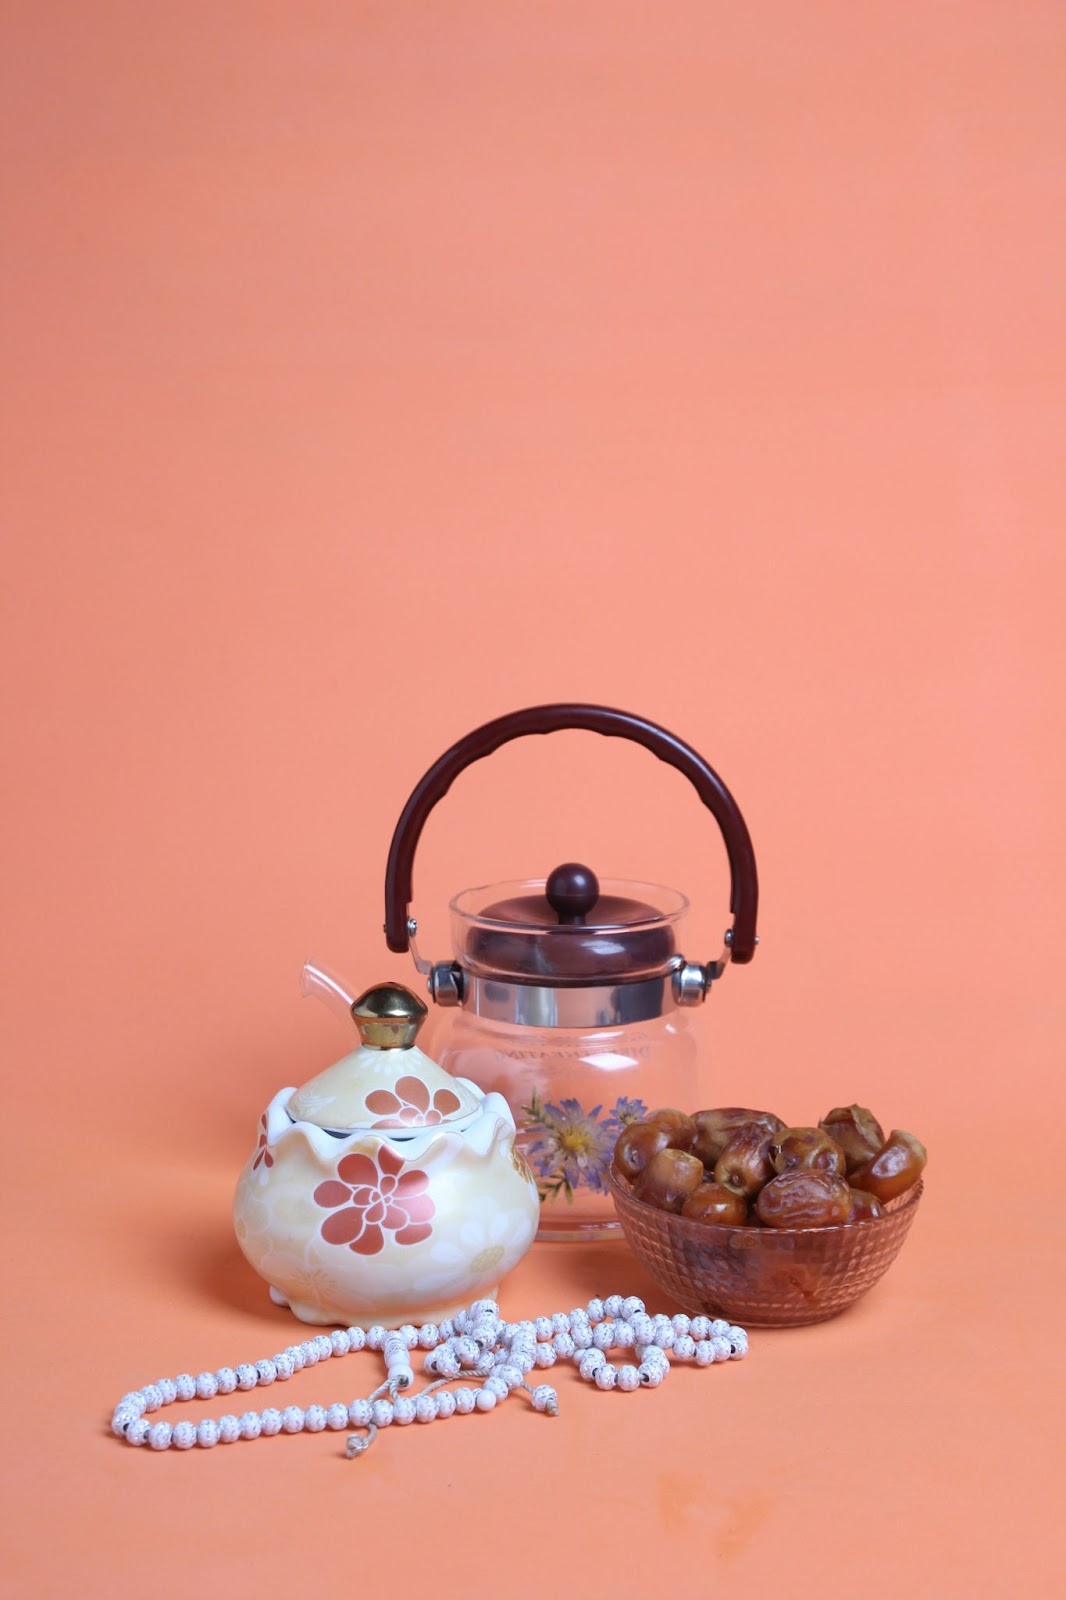 A tea kettle and a bowl of nuts on a pink background.

